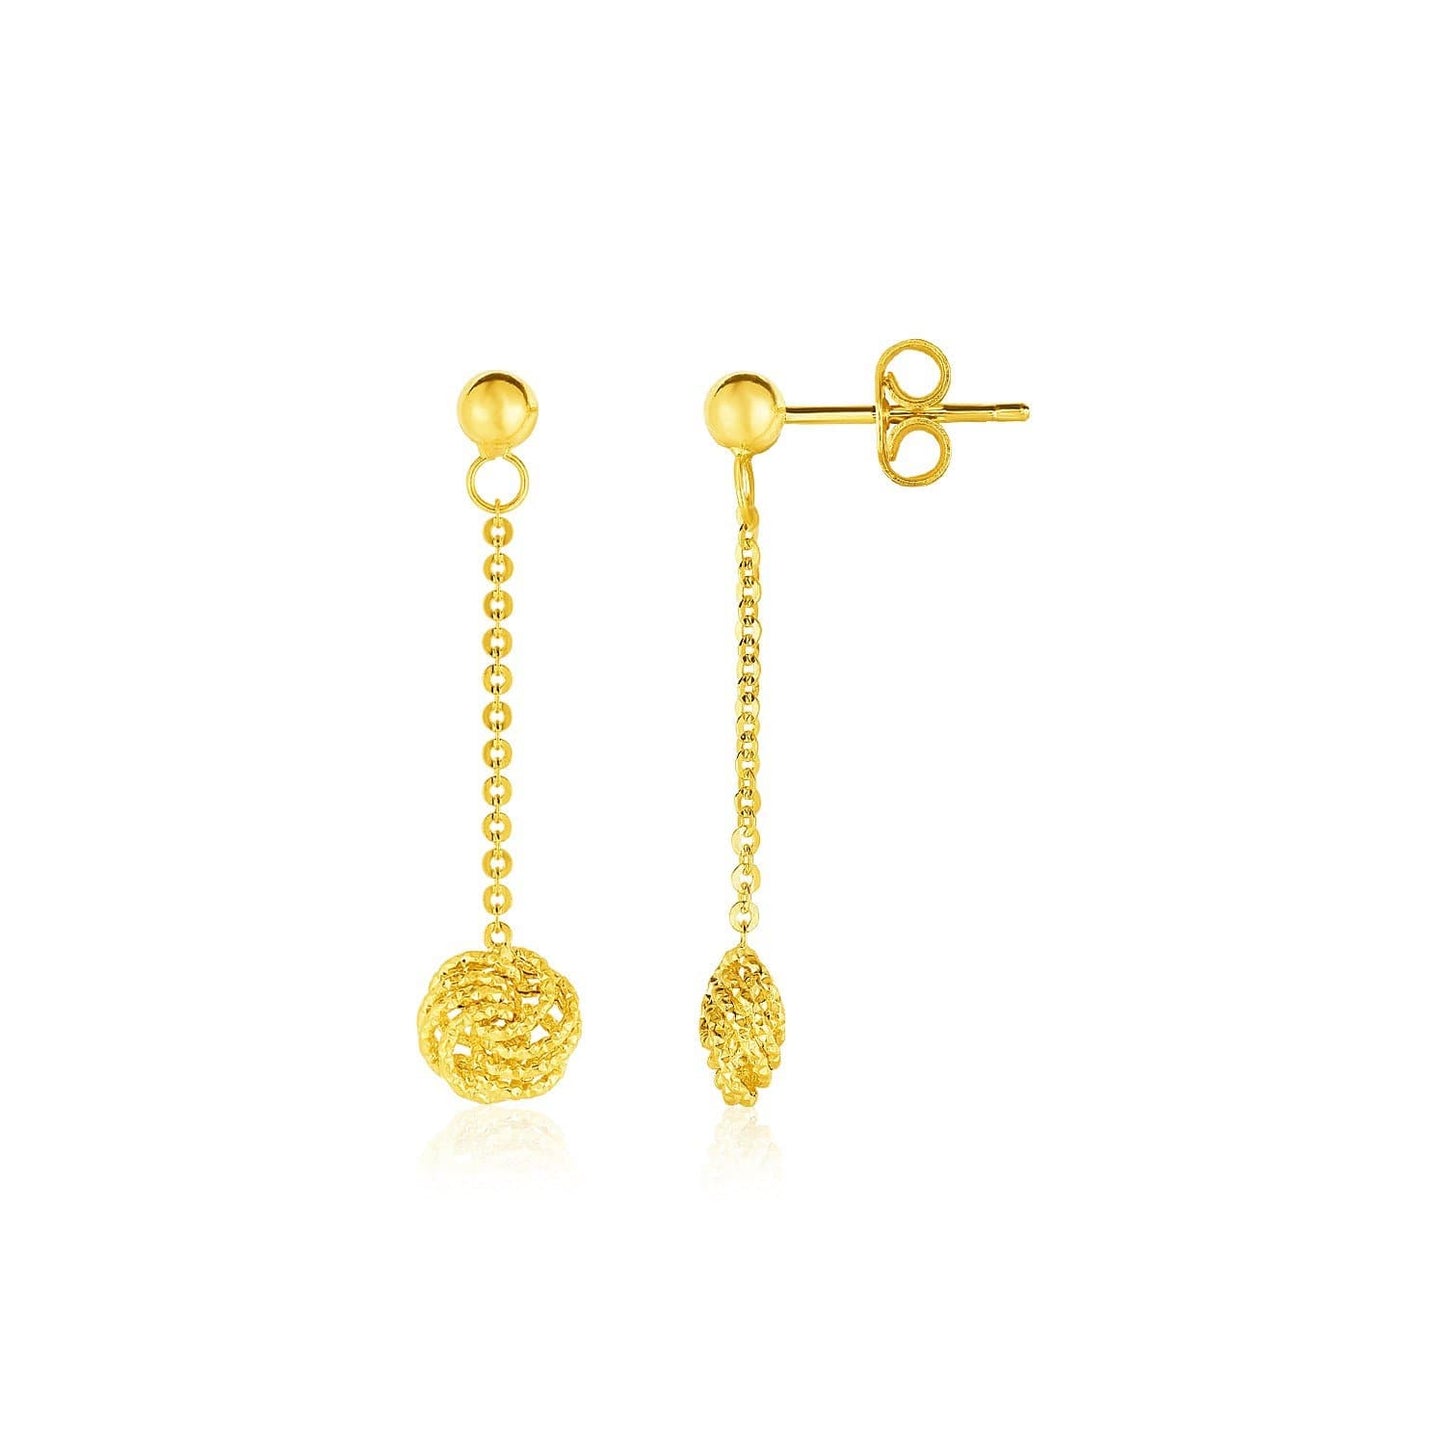 14k Yellow Gold Dangle Earrings with Textured Knots